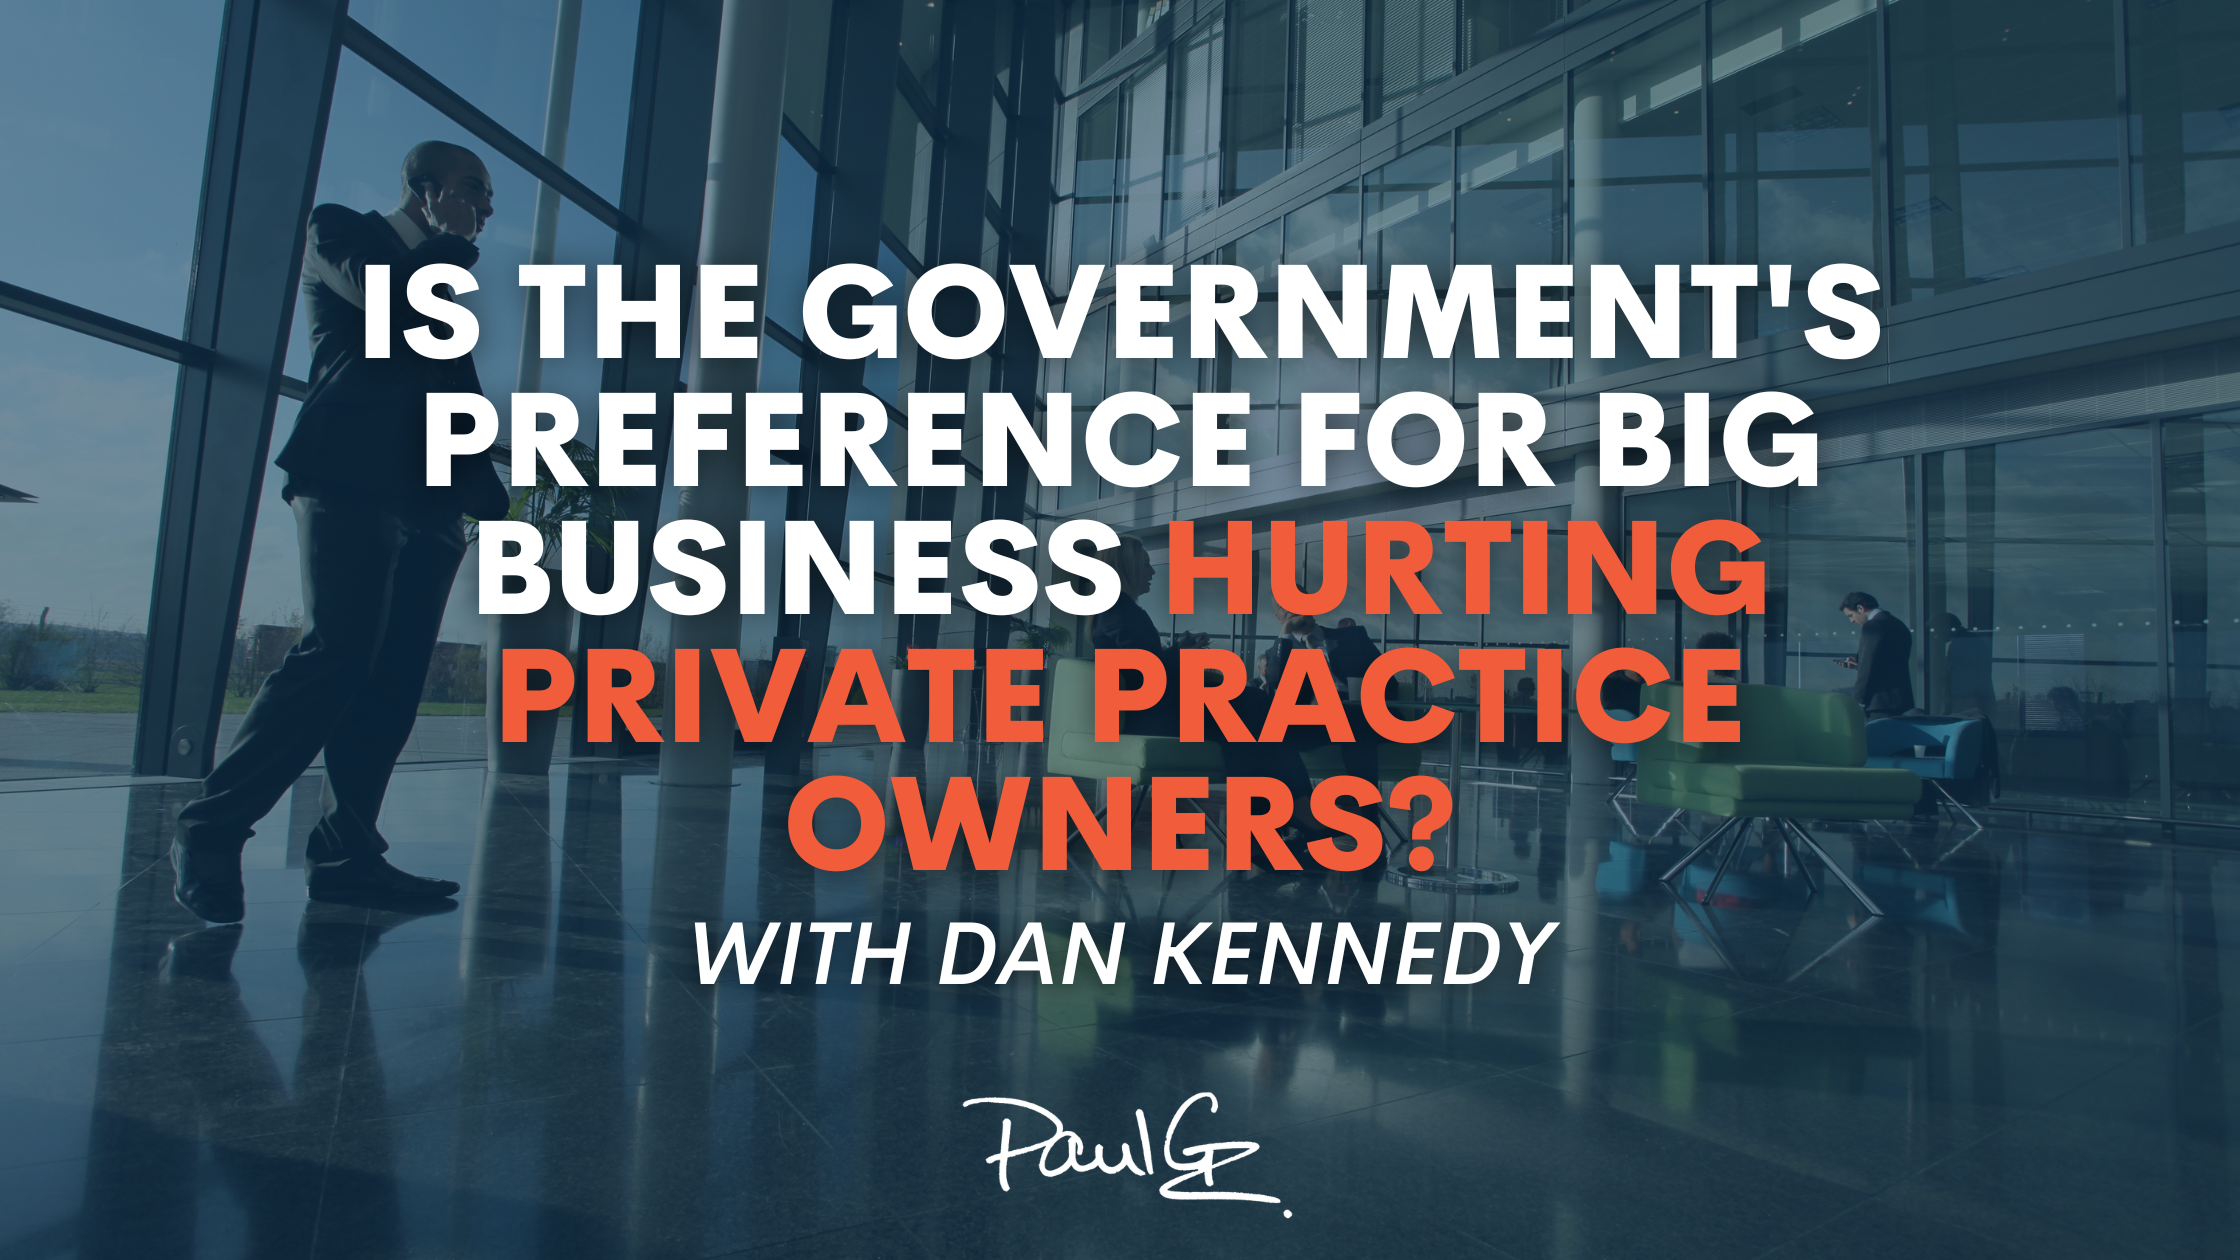 Is the Government’s Preference for Big Business Hurting Private Practice Owners?